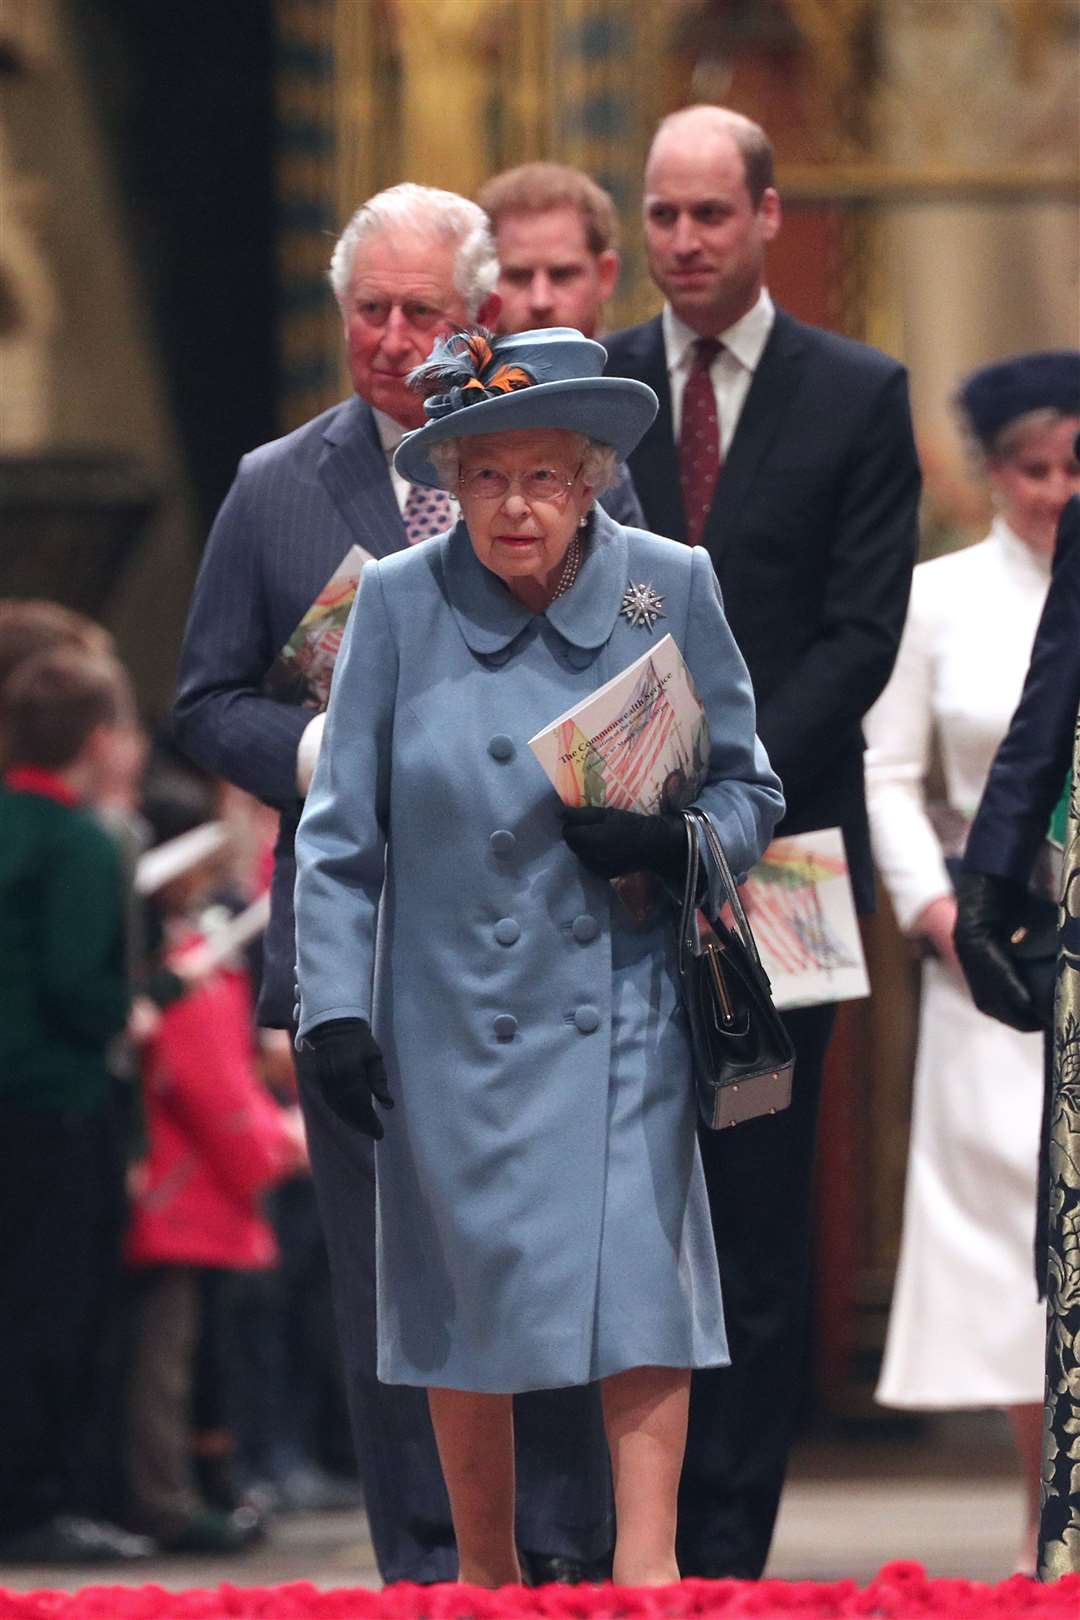 The Queen would not budge on the authority of the Crown when it came to the Sussexes, the book alleges (Yui Mok/PA)